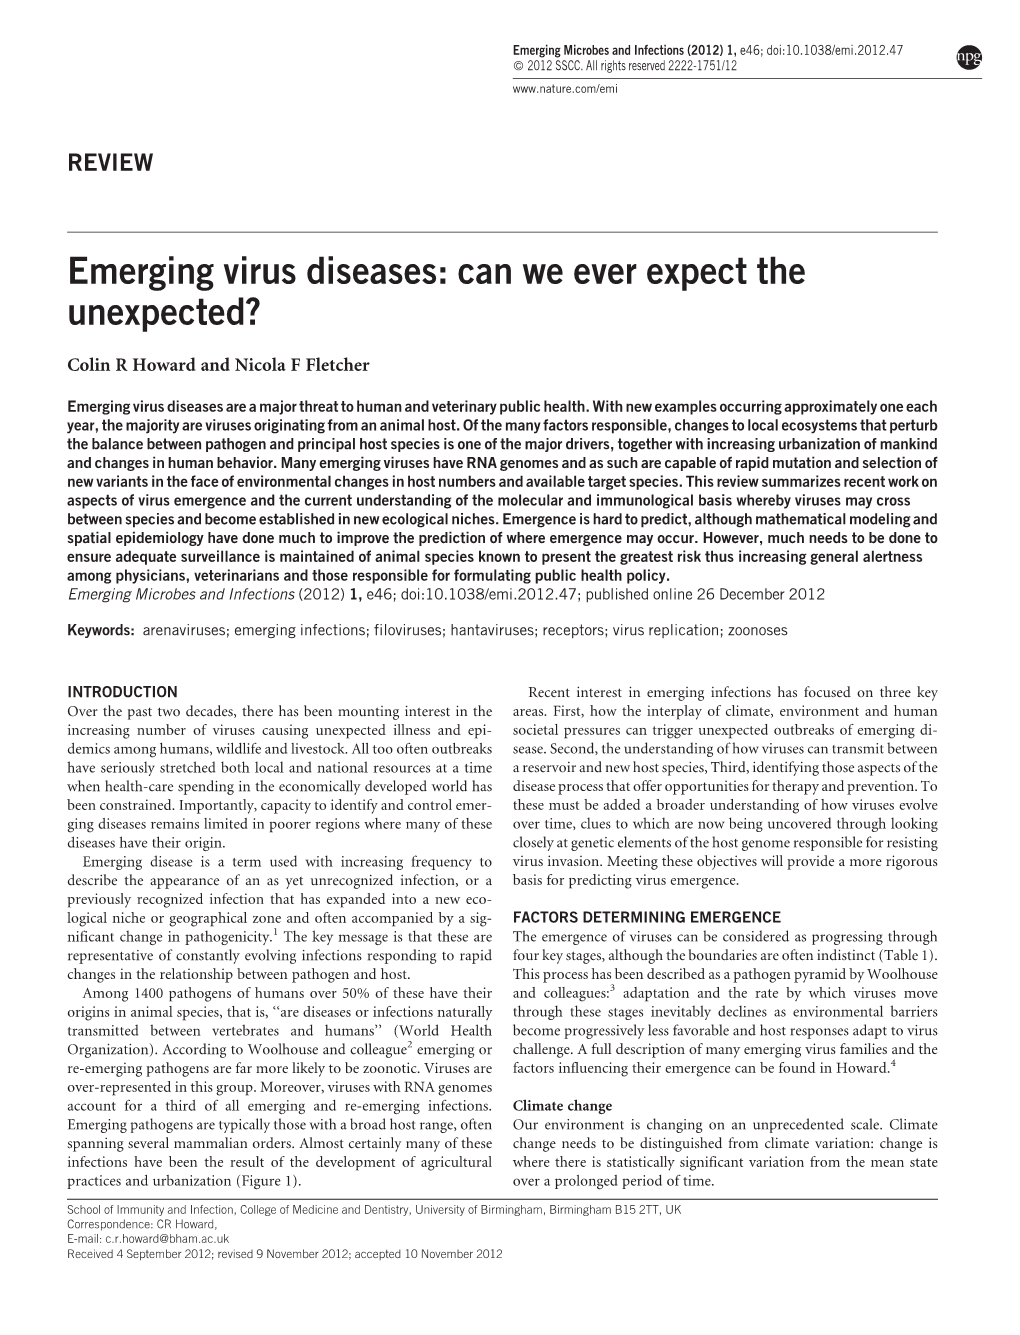 Emerging Virus Diseases: Can We Ever Expect the Unexpected?